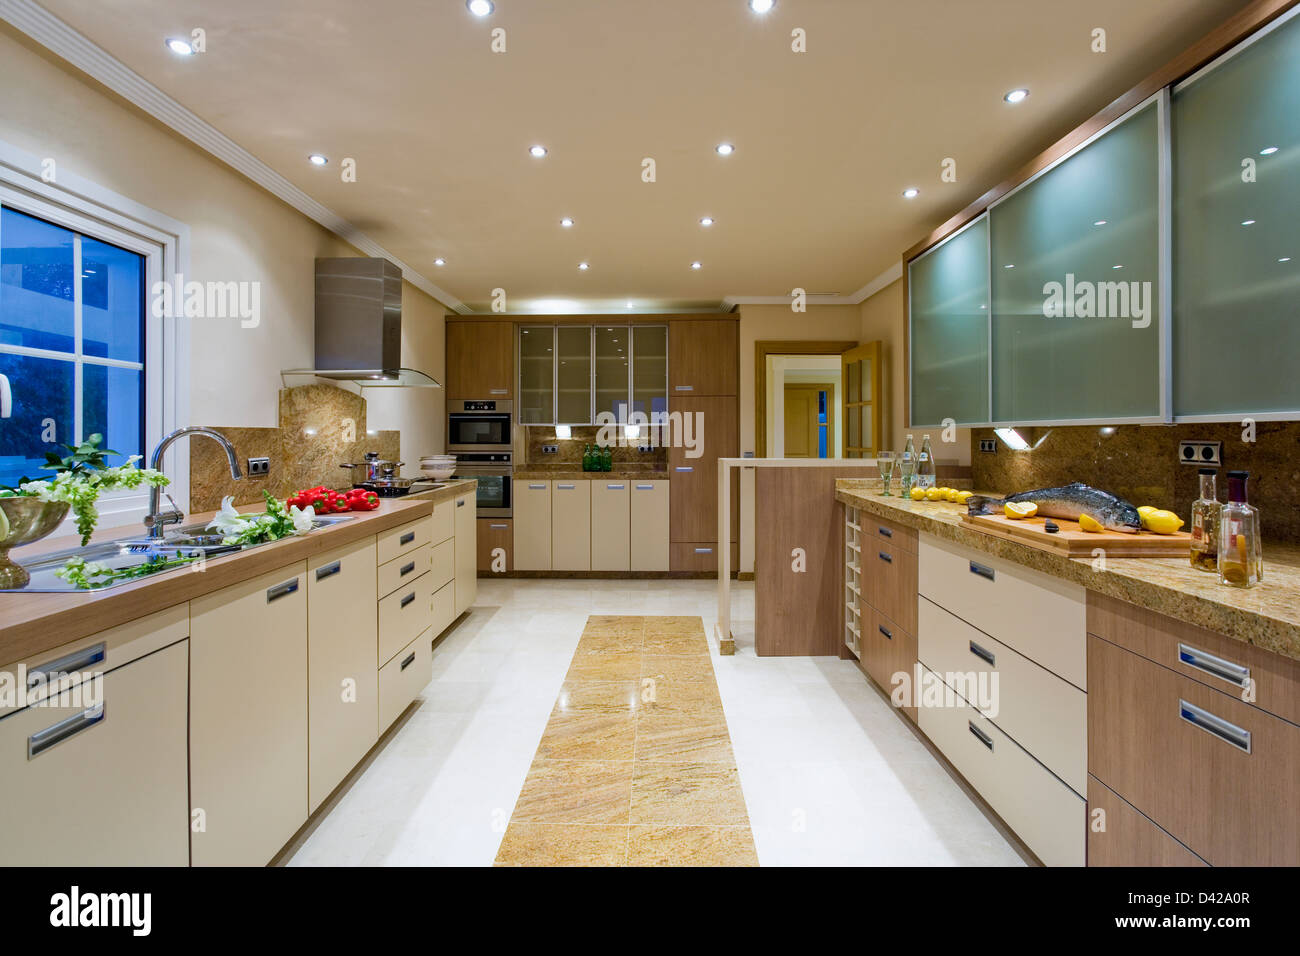 Large Modern Kitchen In Spanish Villa With Recessed Ceiling Lights Stock Photo Alamy